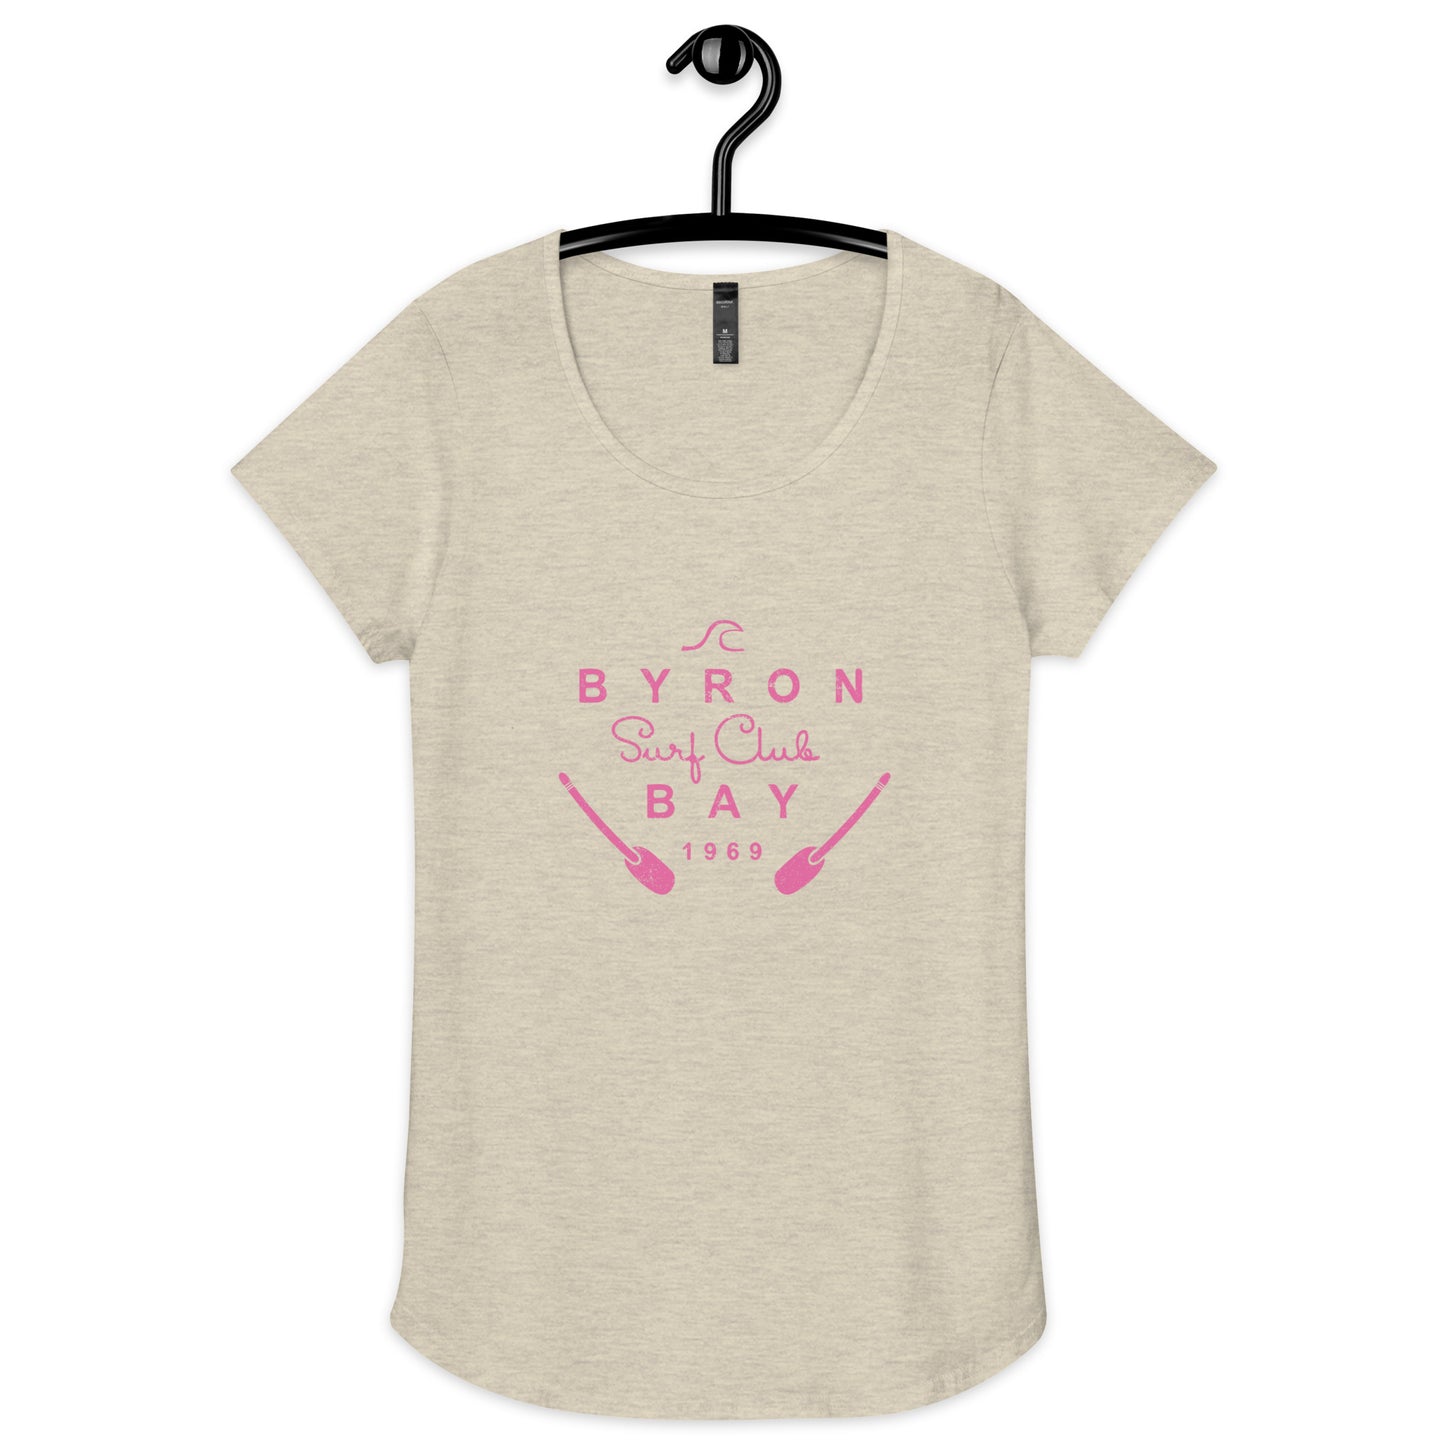  Women’s Round Neck Tee - Oatmeal - Front flat lay view - pink Byron Bay Surf Club logo on front - Genuine Byron Bay Merchandise | Produced by Go Sea Kayak Byron Bay 